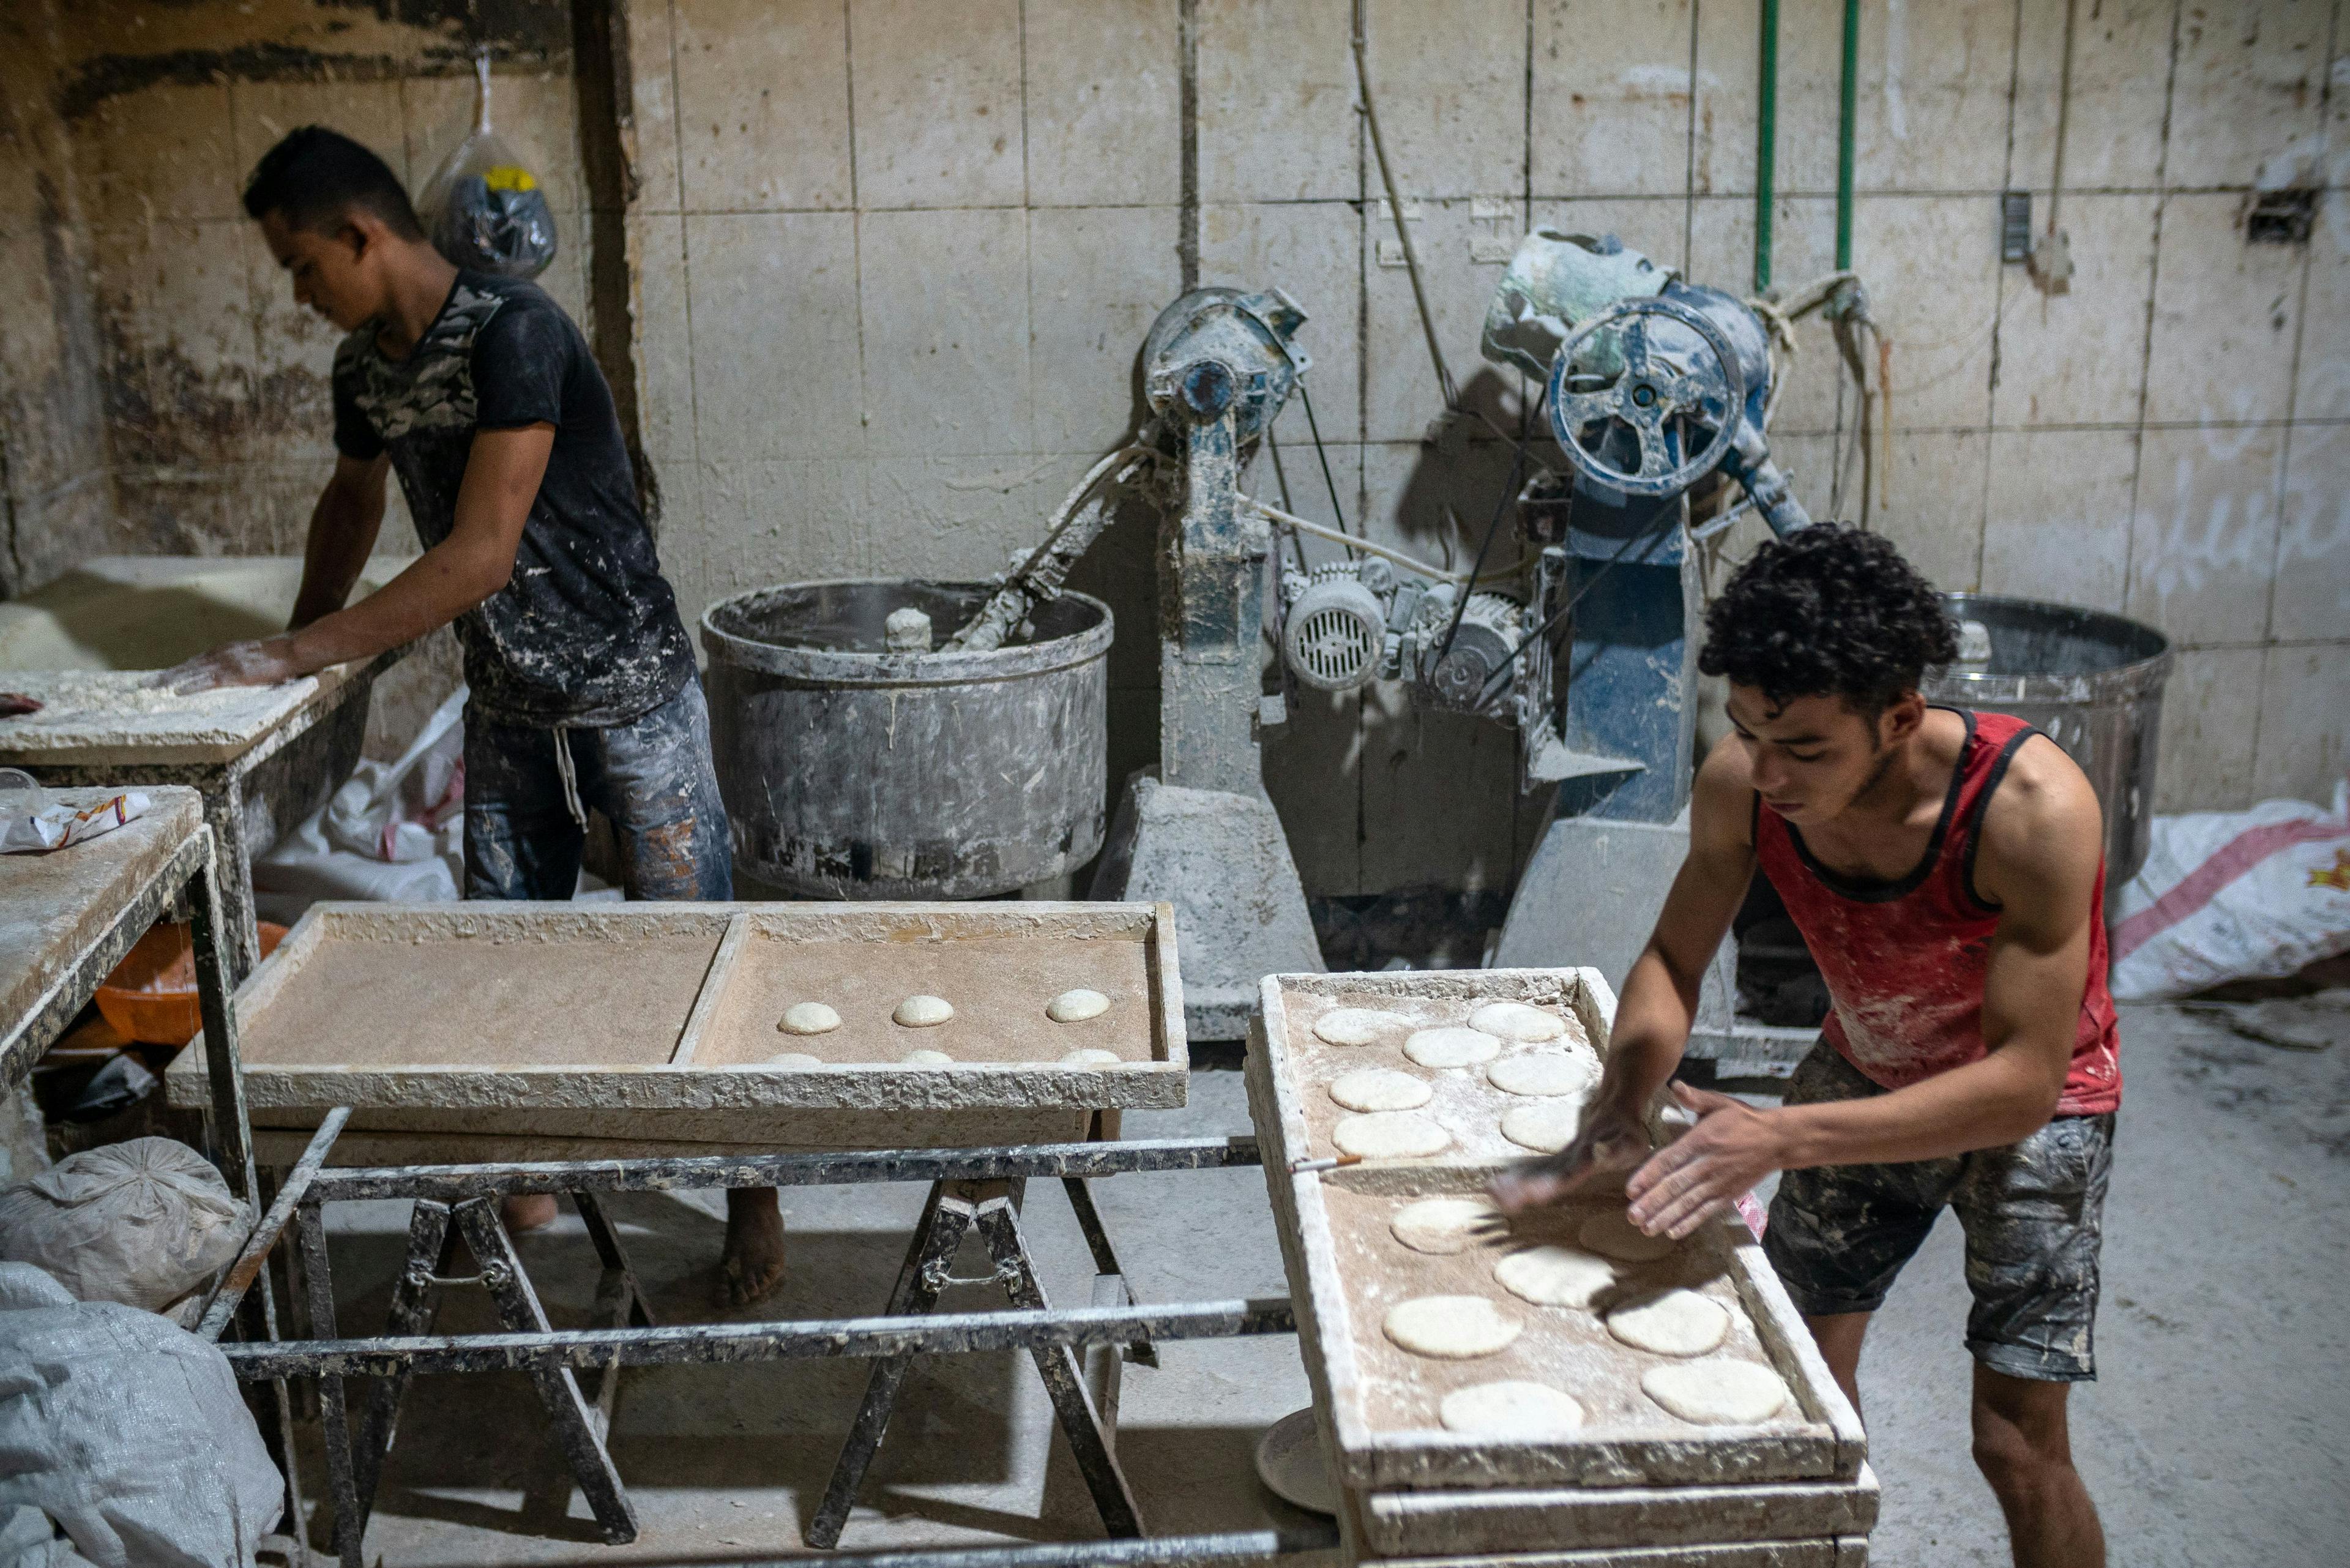 Hassan Gabr Ahmed (front) and Taha El-Seidie (back) moved from a village in the Sohag region along the Nile River, and now work in this downtown bakery. Millions of Africans will make the rural-urban trek, despite cities’ climate risks.